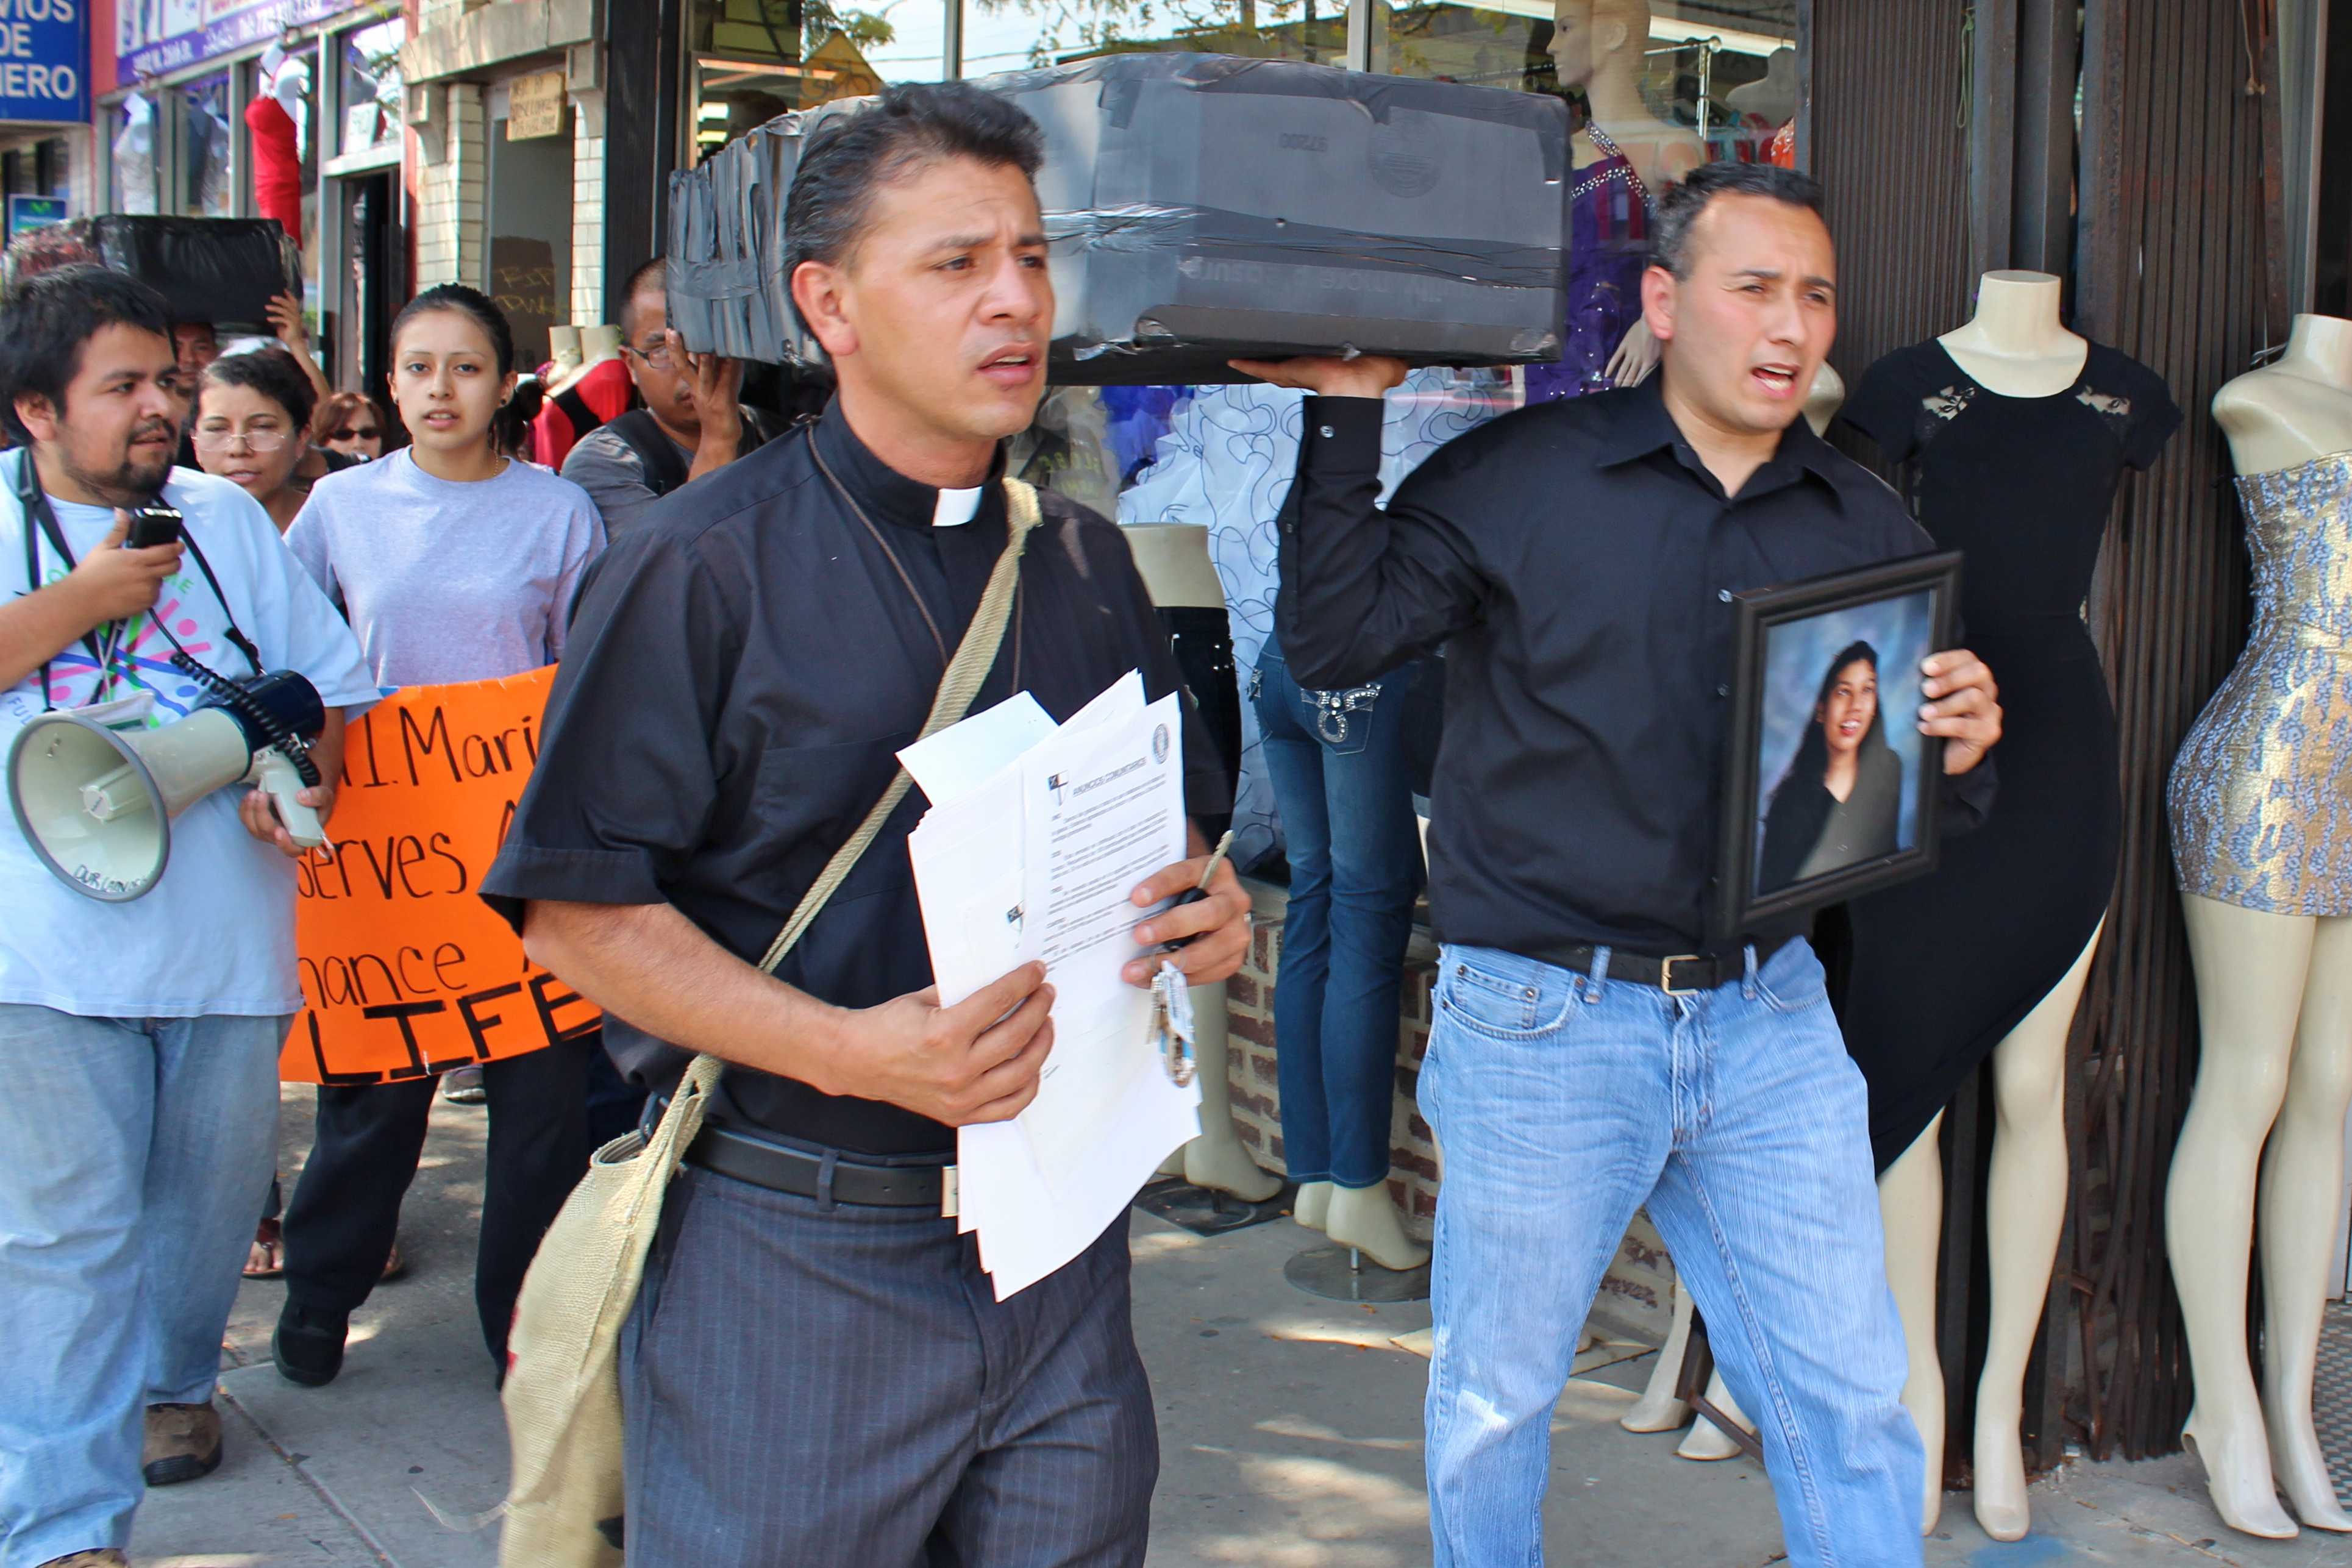 The+Rev.+Jose+Landaverde+leads+about+40+protestors+as+they+begin+their+march+to+Northwestern+Memorial+Hospital+on+Sunday+afternoon.+The+group+carried+caskets+to+represent+those+who+died+while+waiting+for+organ+transplants.